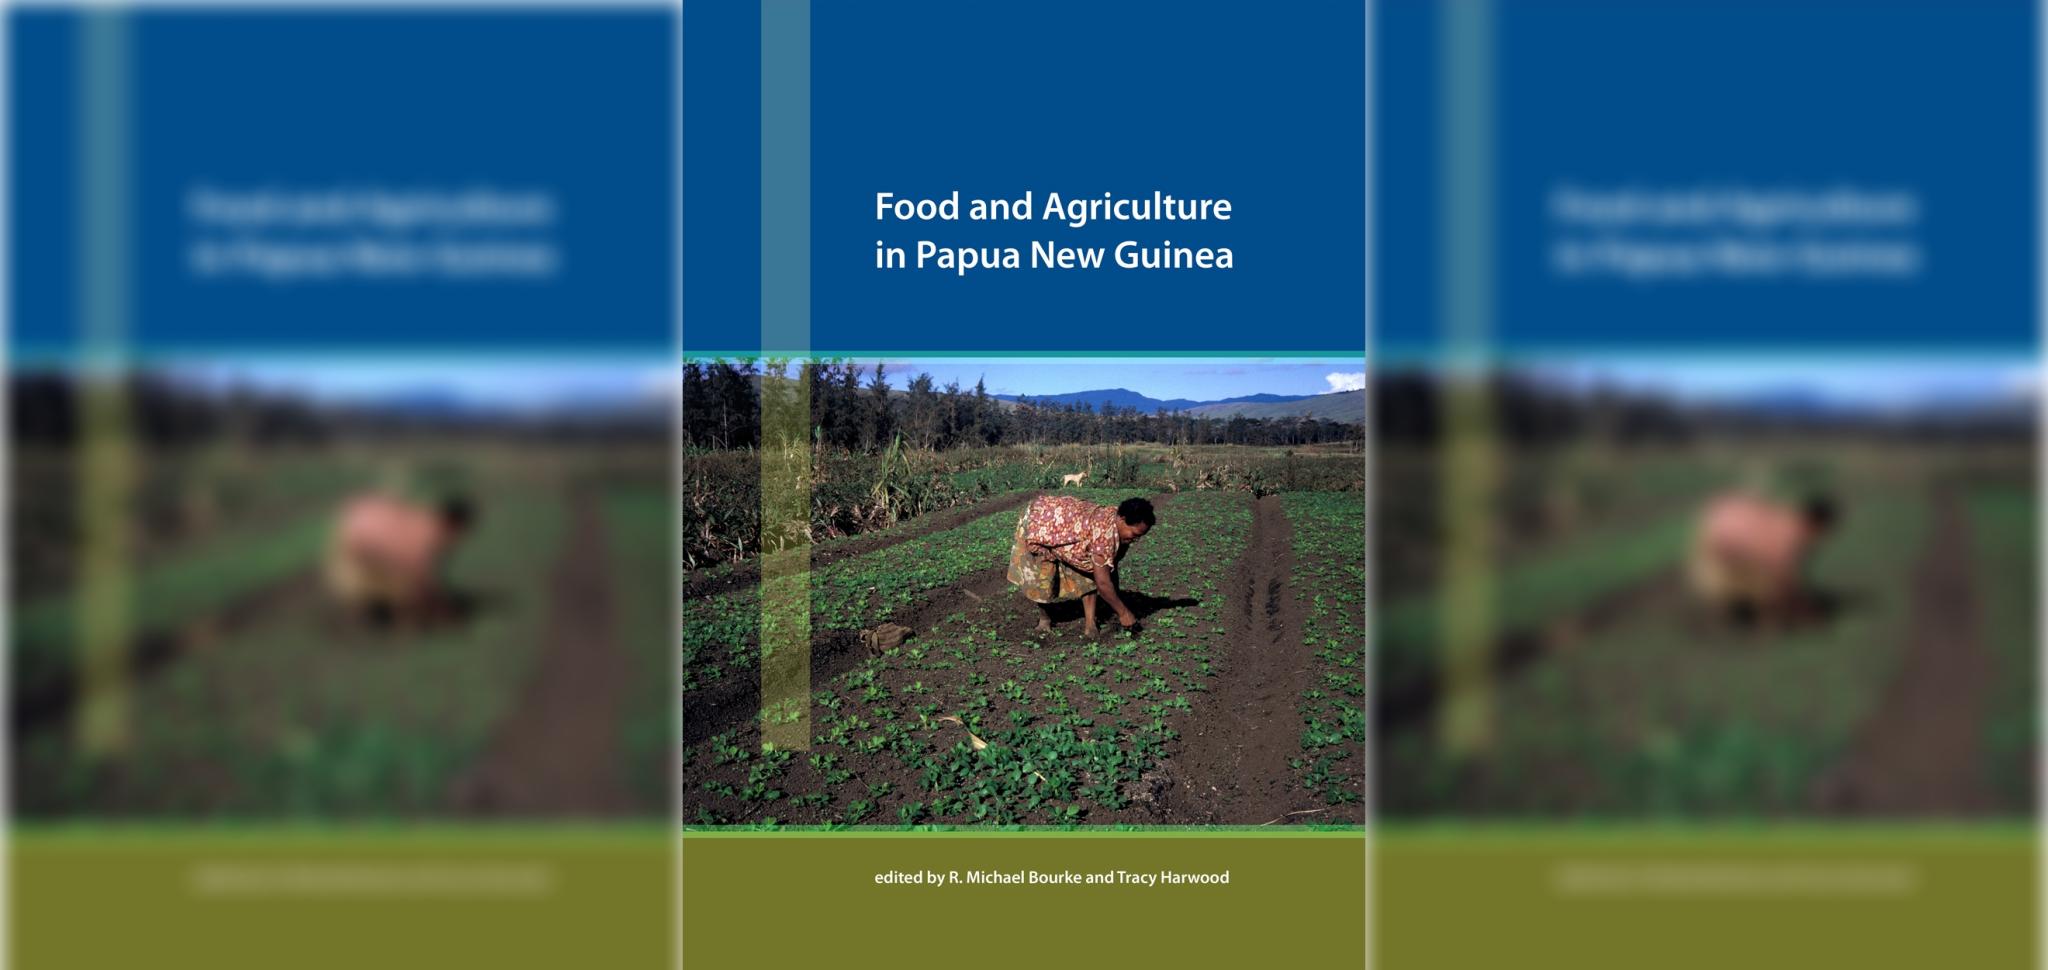 Food and Agriculture in Papua New Guinea